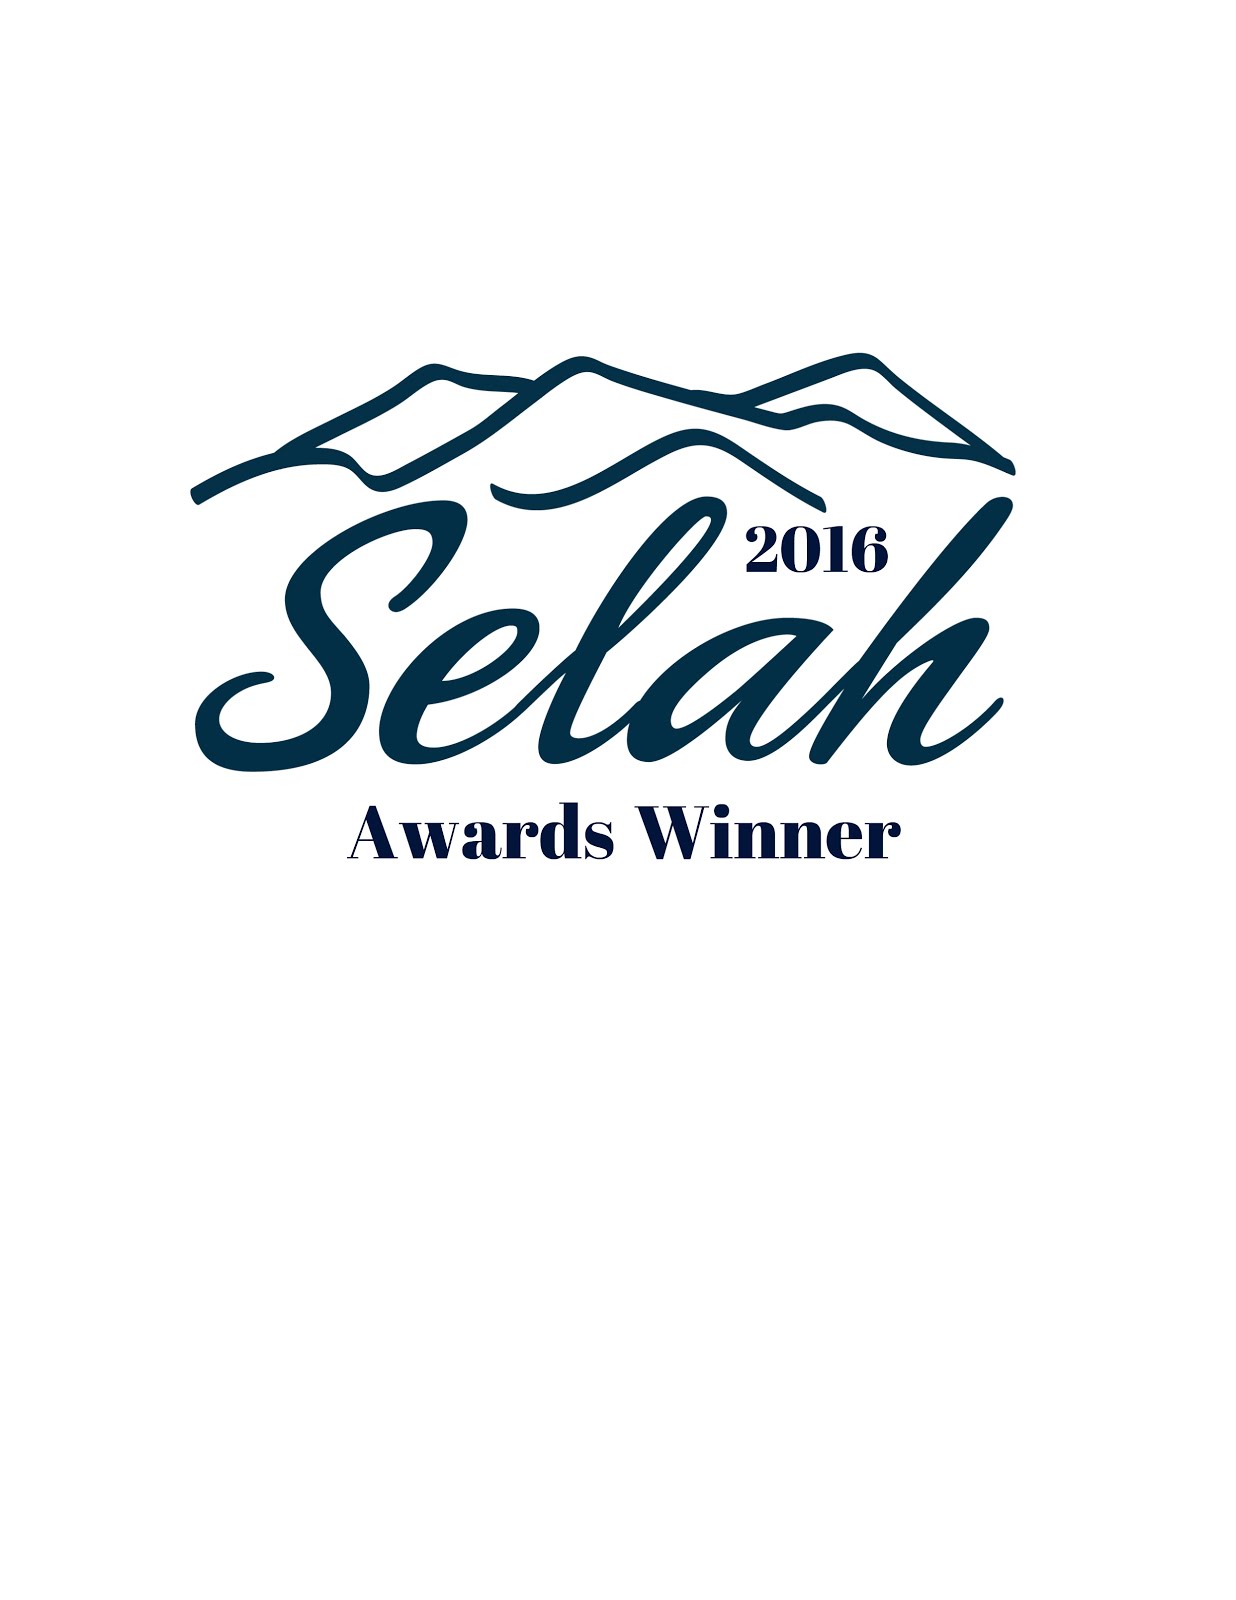 Covert Justice won the 2016 Selah Award in the Mystery/Suspense Category!